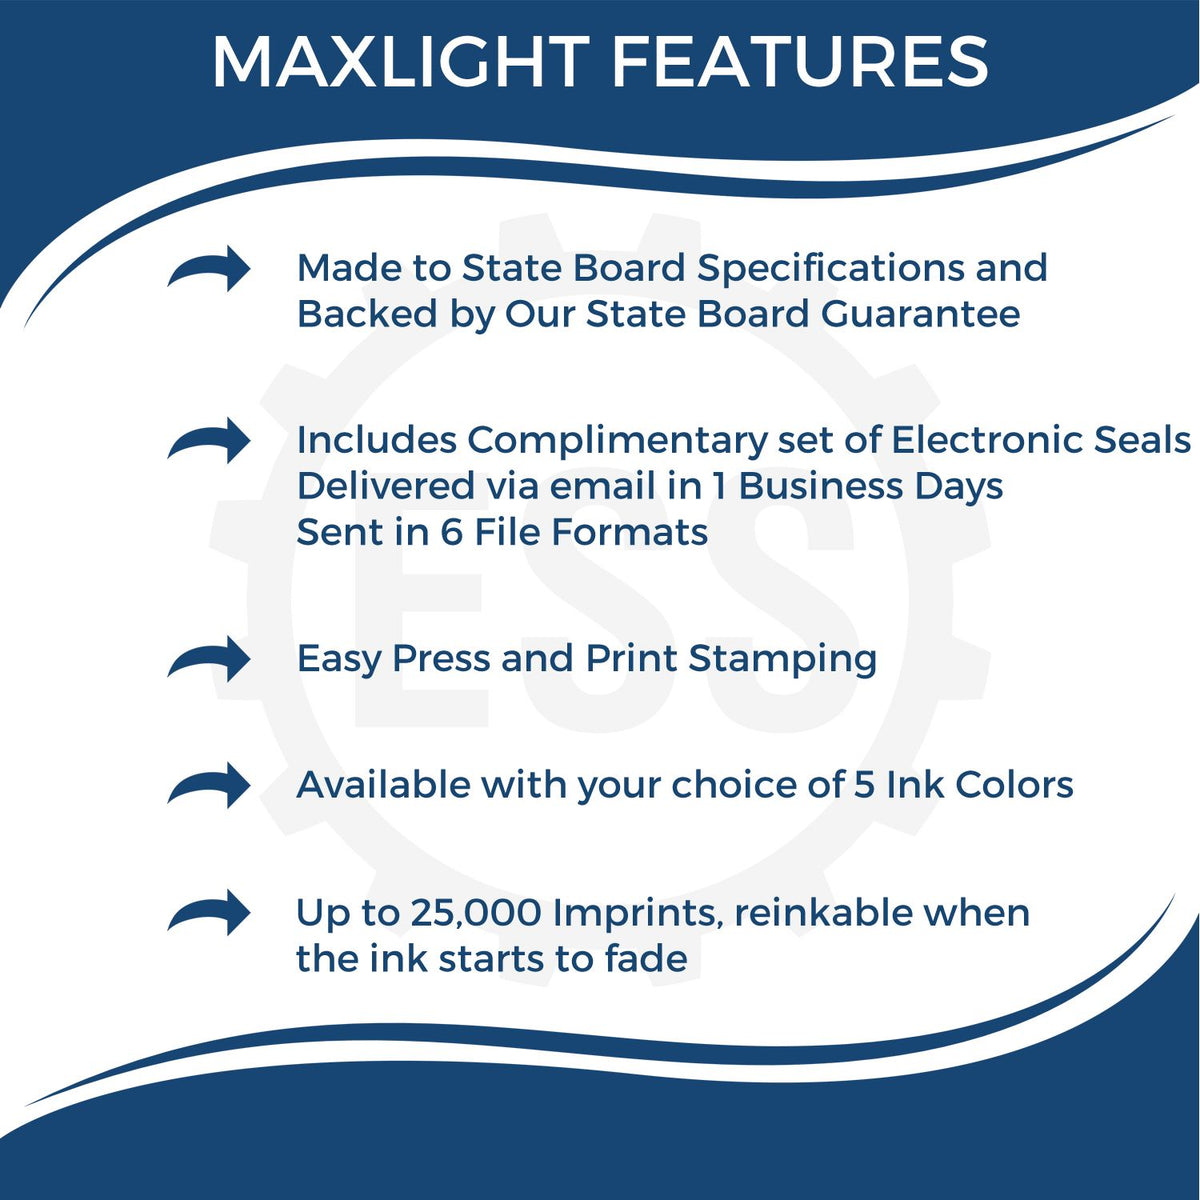 A picture of an infographic highlighting the selling points for the Premium MaxLight Pre-Inked Iowa Landscape Architectural Stamp